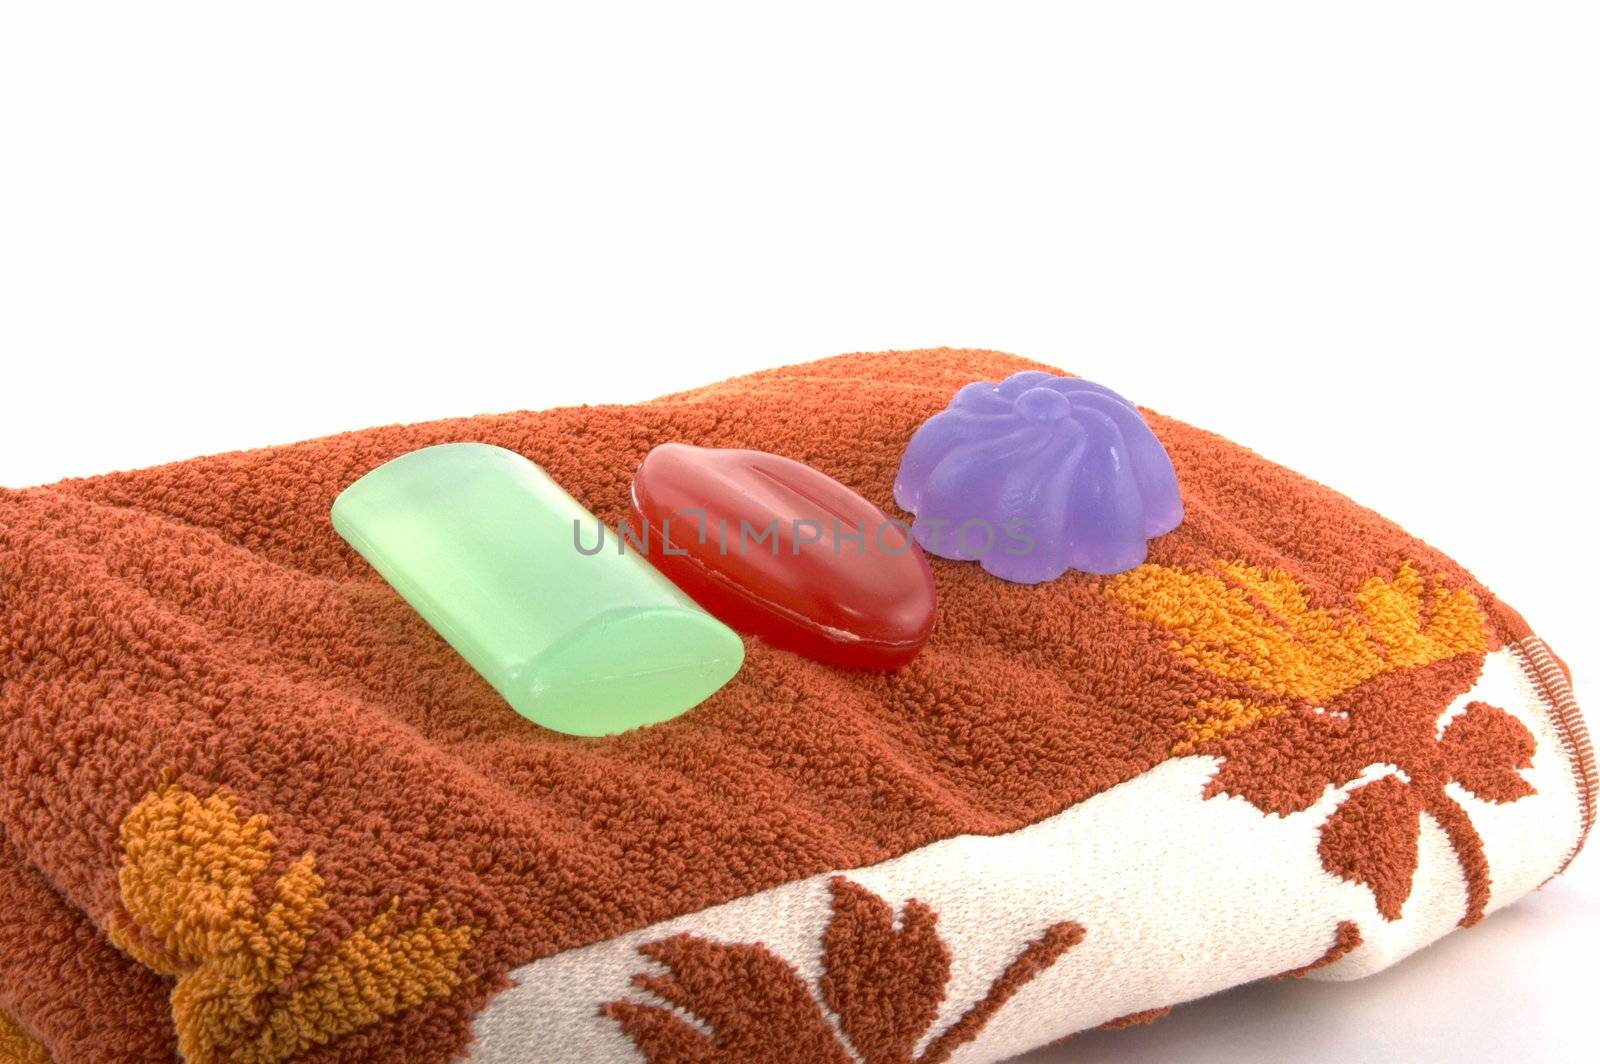 soap laying on a brown terry towel by holligan78